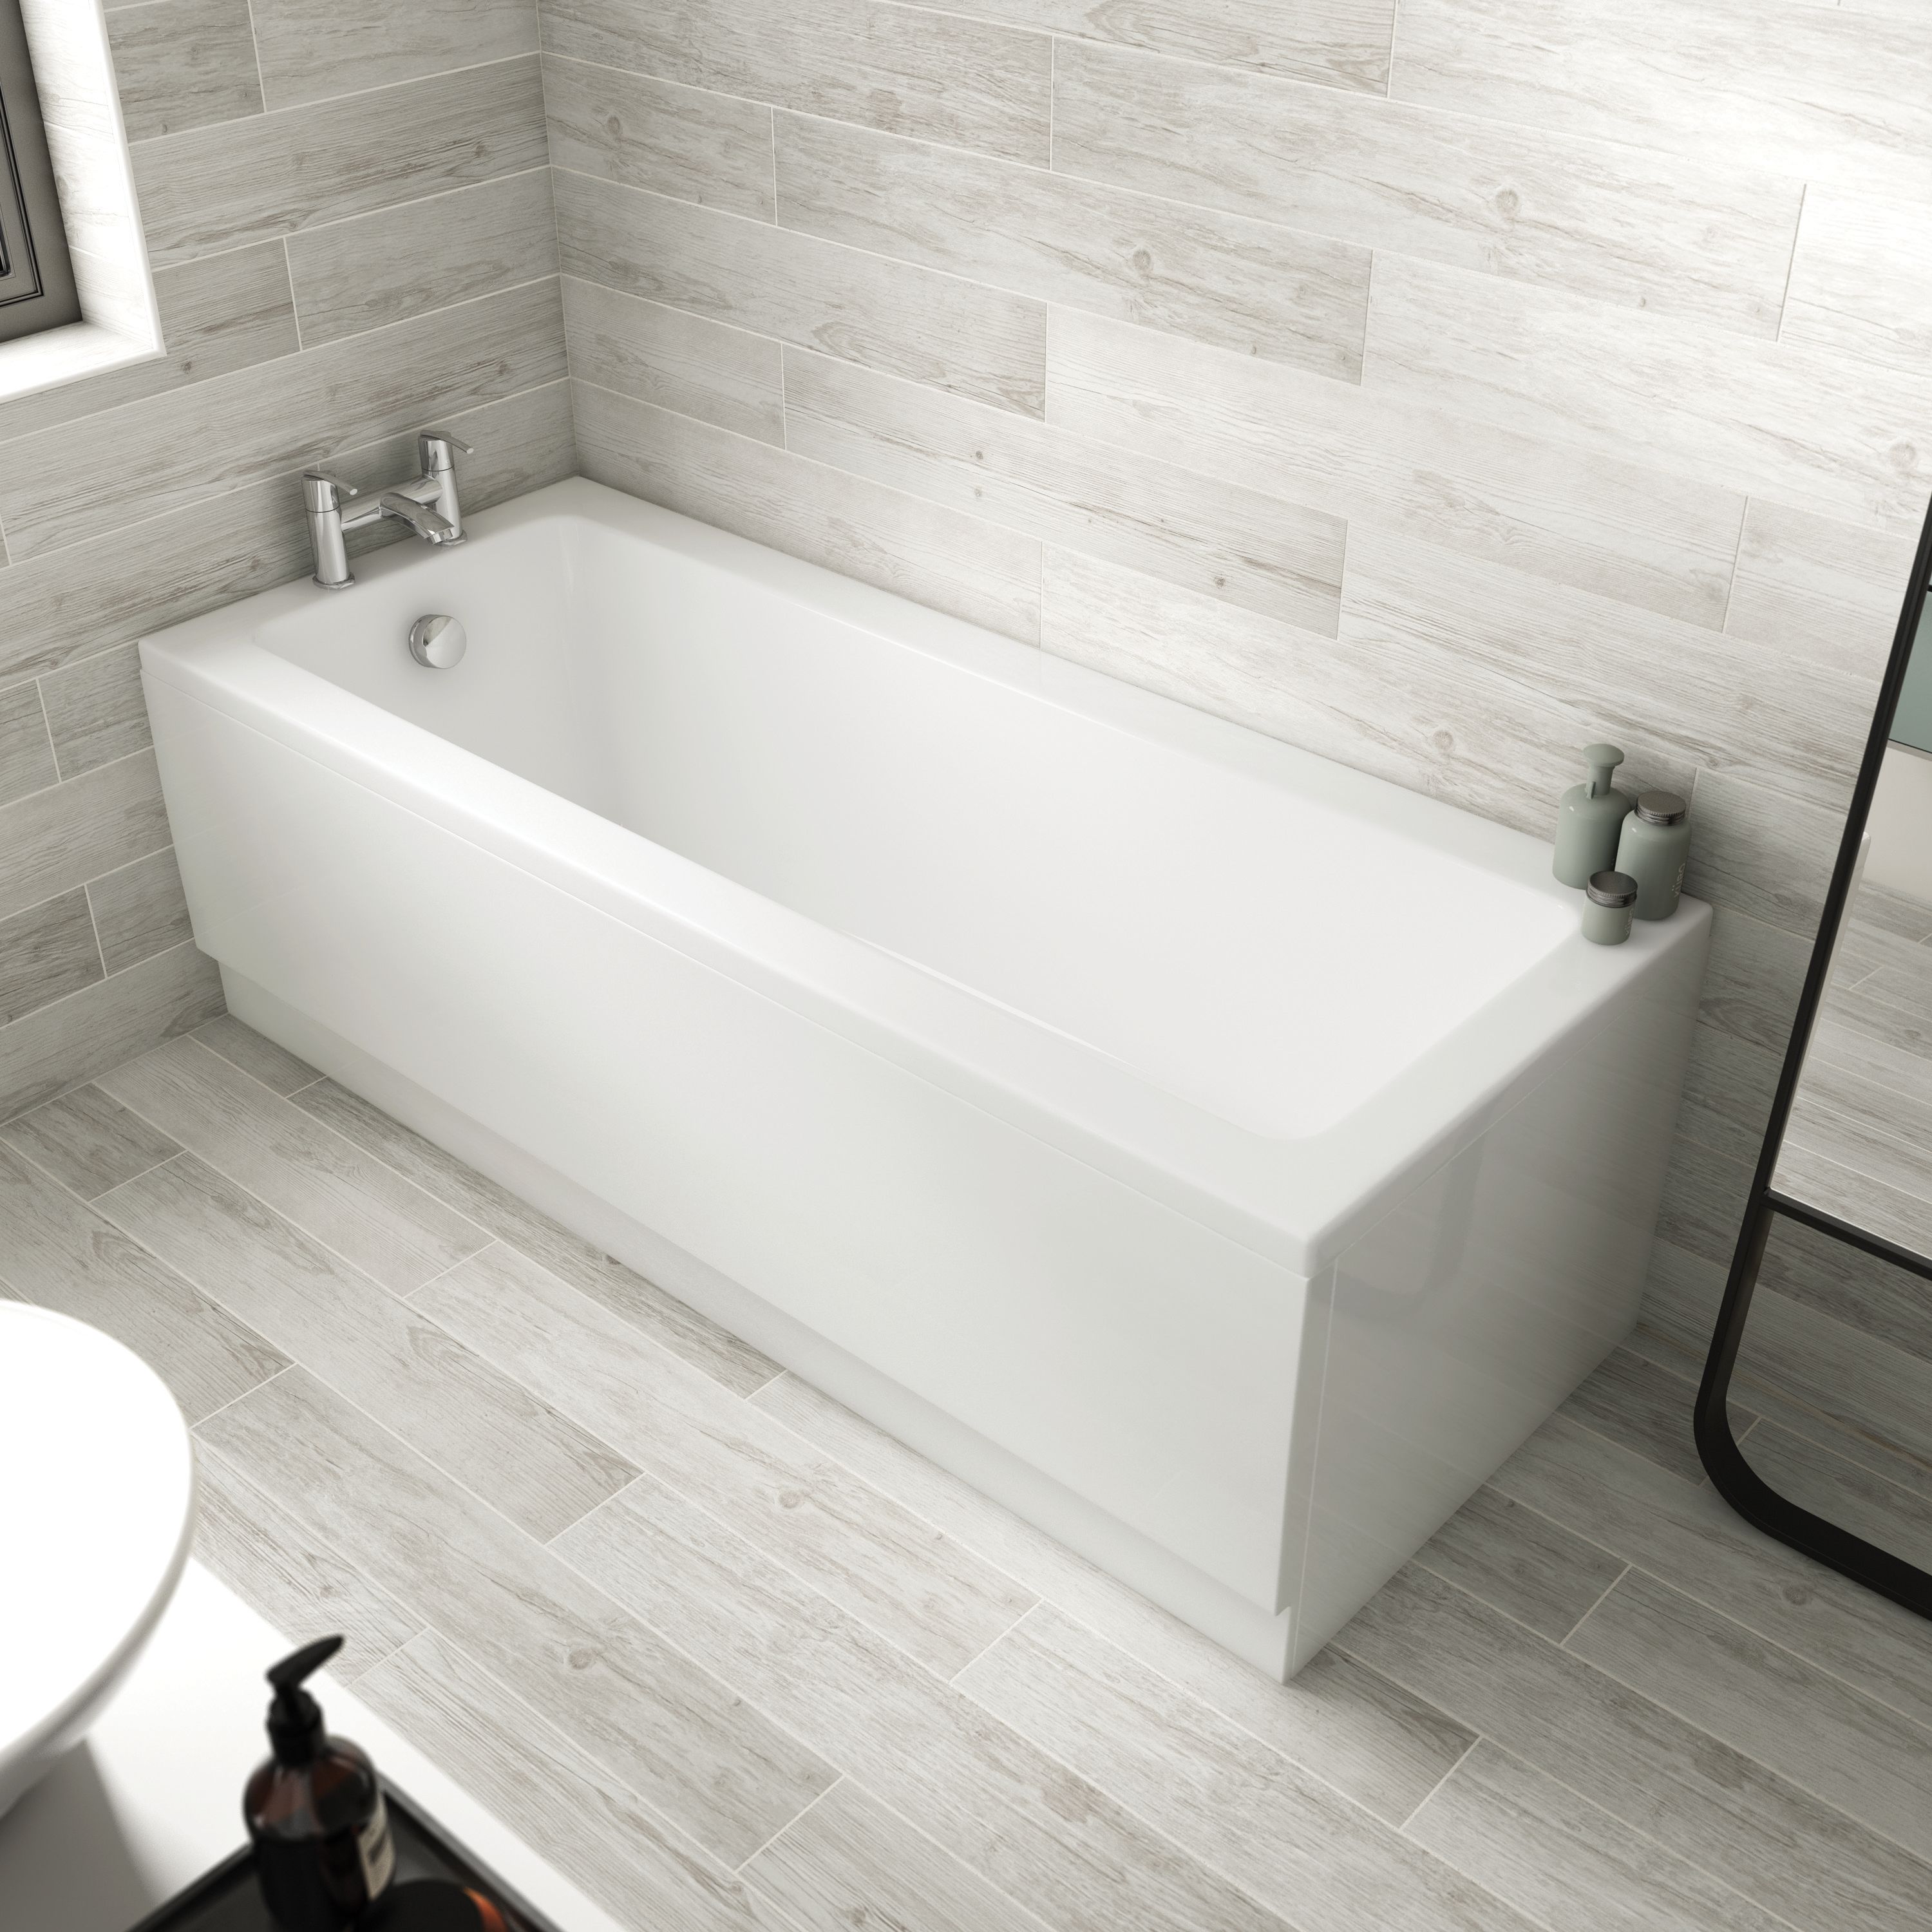 Image of Wickes Camisa Reinforced Straight Bath - 1700 x 750mm